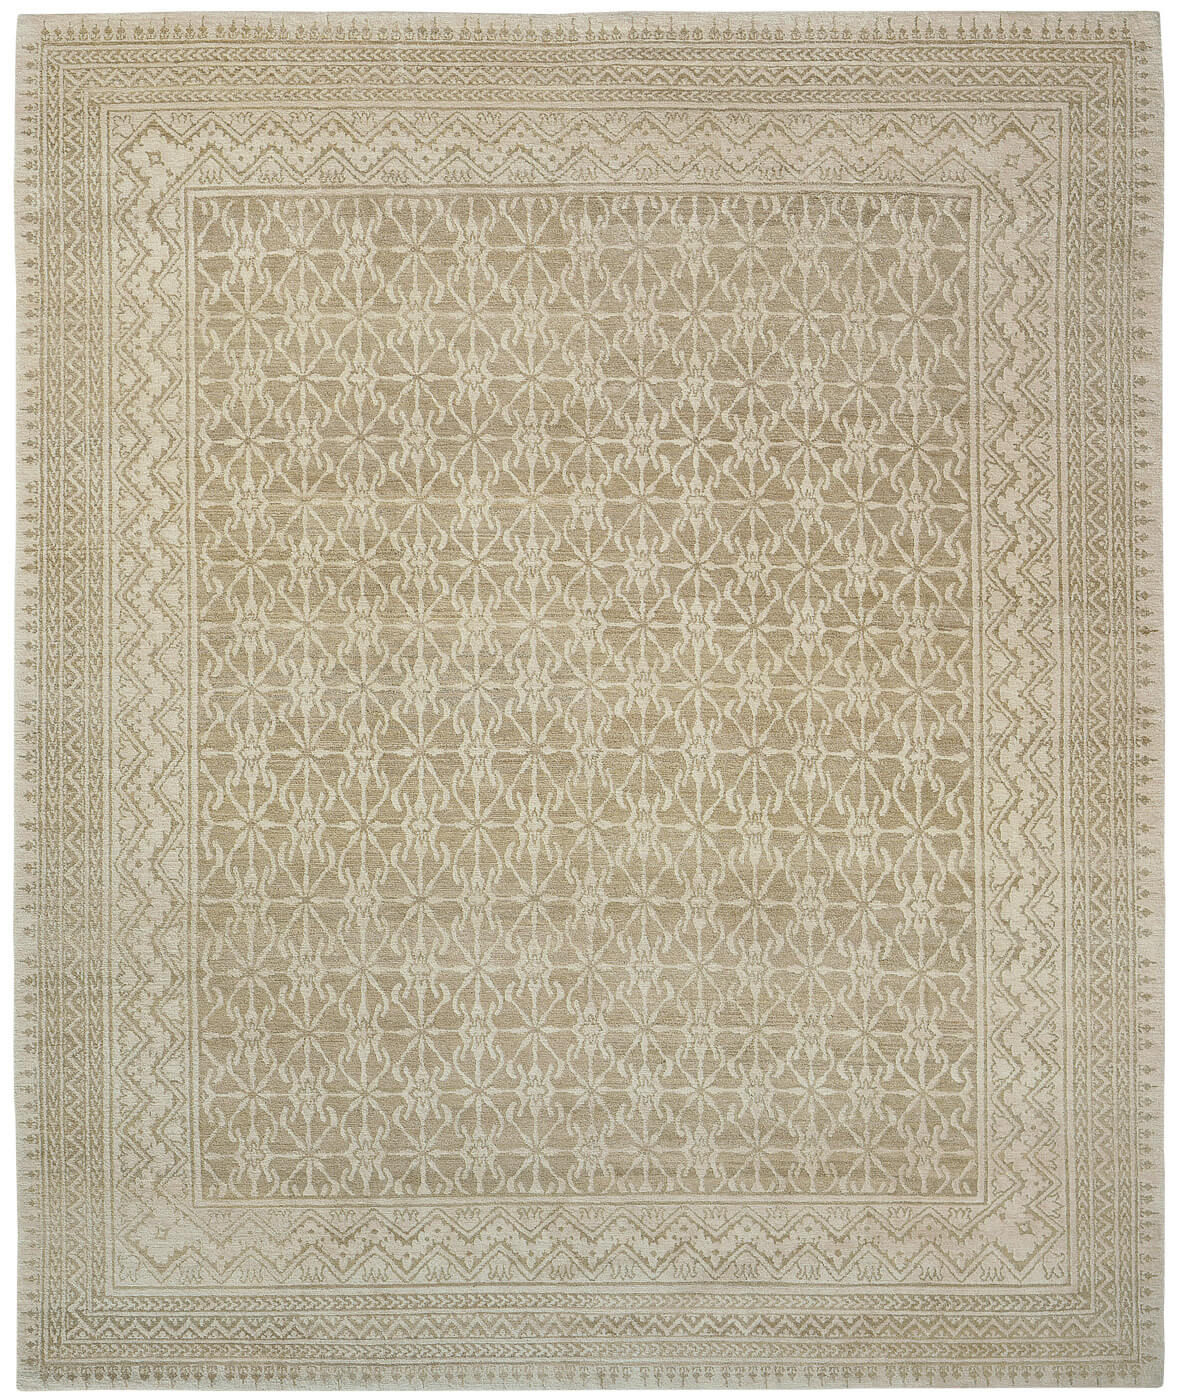 Blueberry Luxury Hand-woven Rug ☞ Size: 250 x 300 cm